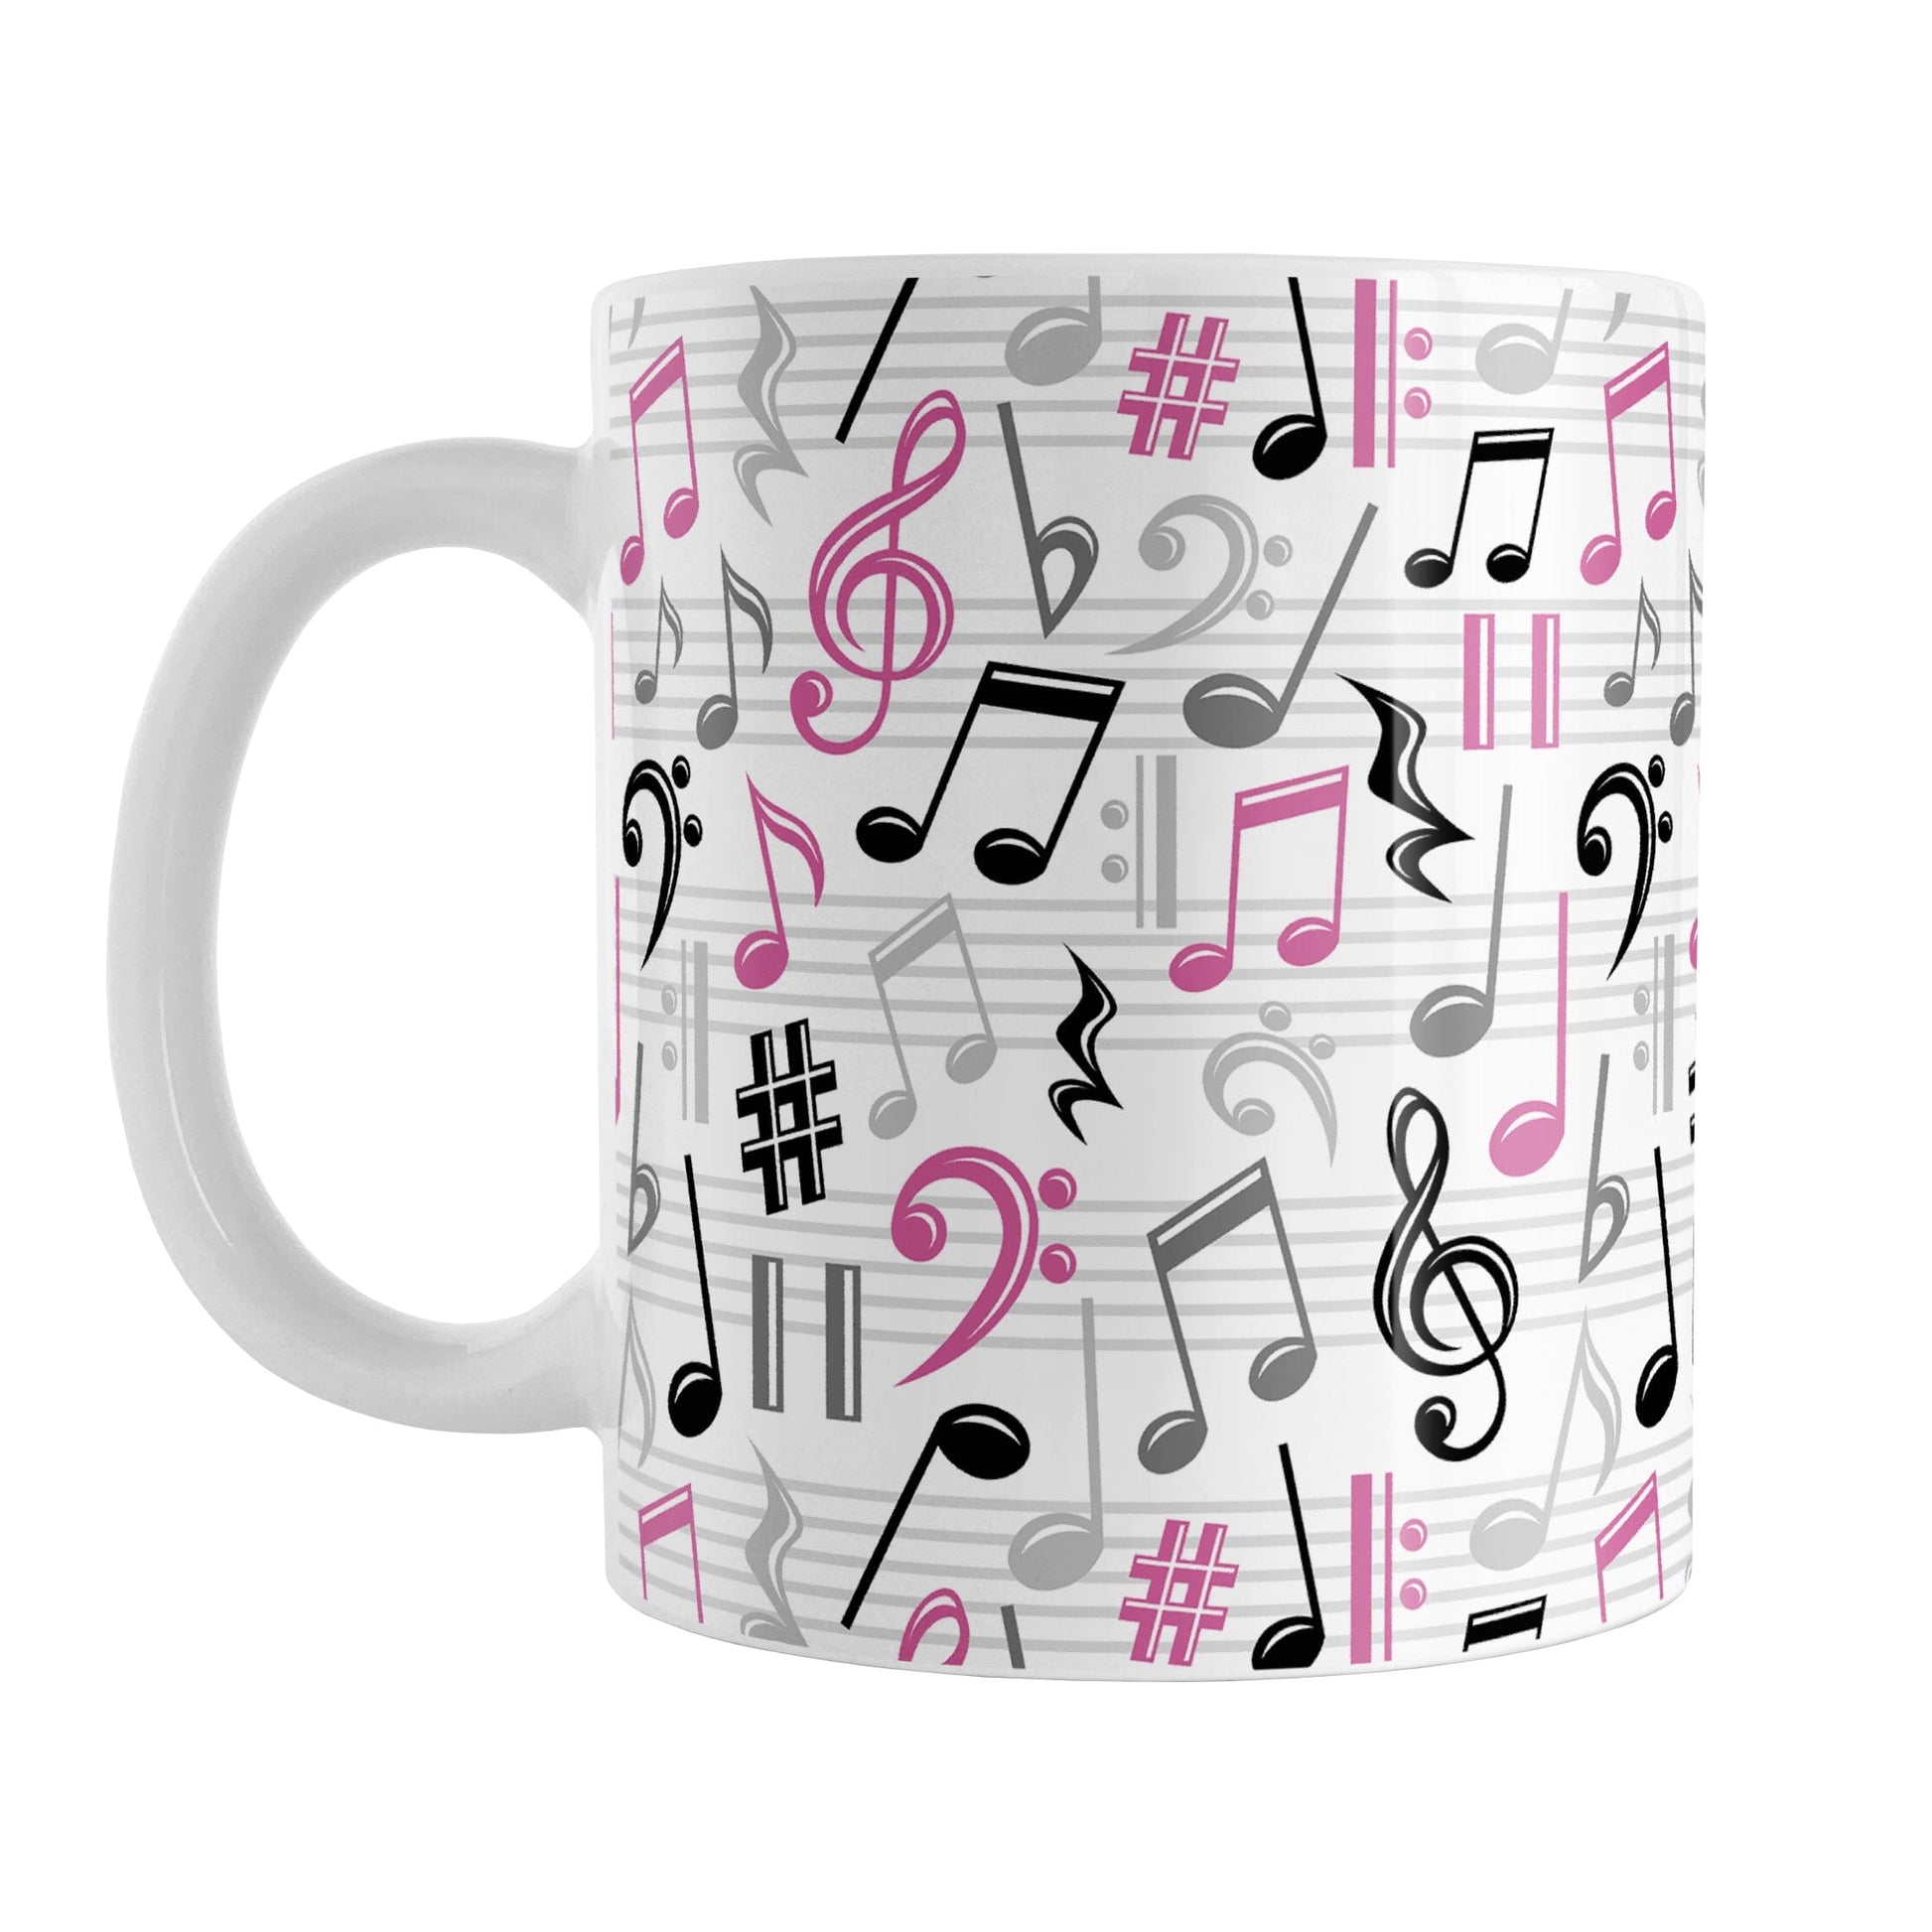 Pink Music Notes Pattern Mug (11oz) at Amy's Coffee Mugs. A ceramic coffee mug designed with music notes and symbols in pink, black, and gray in a pattern that wraps around the mug to the handle.